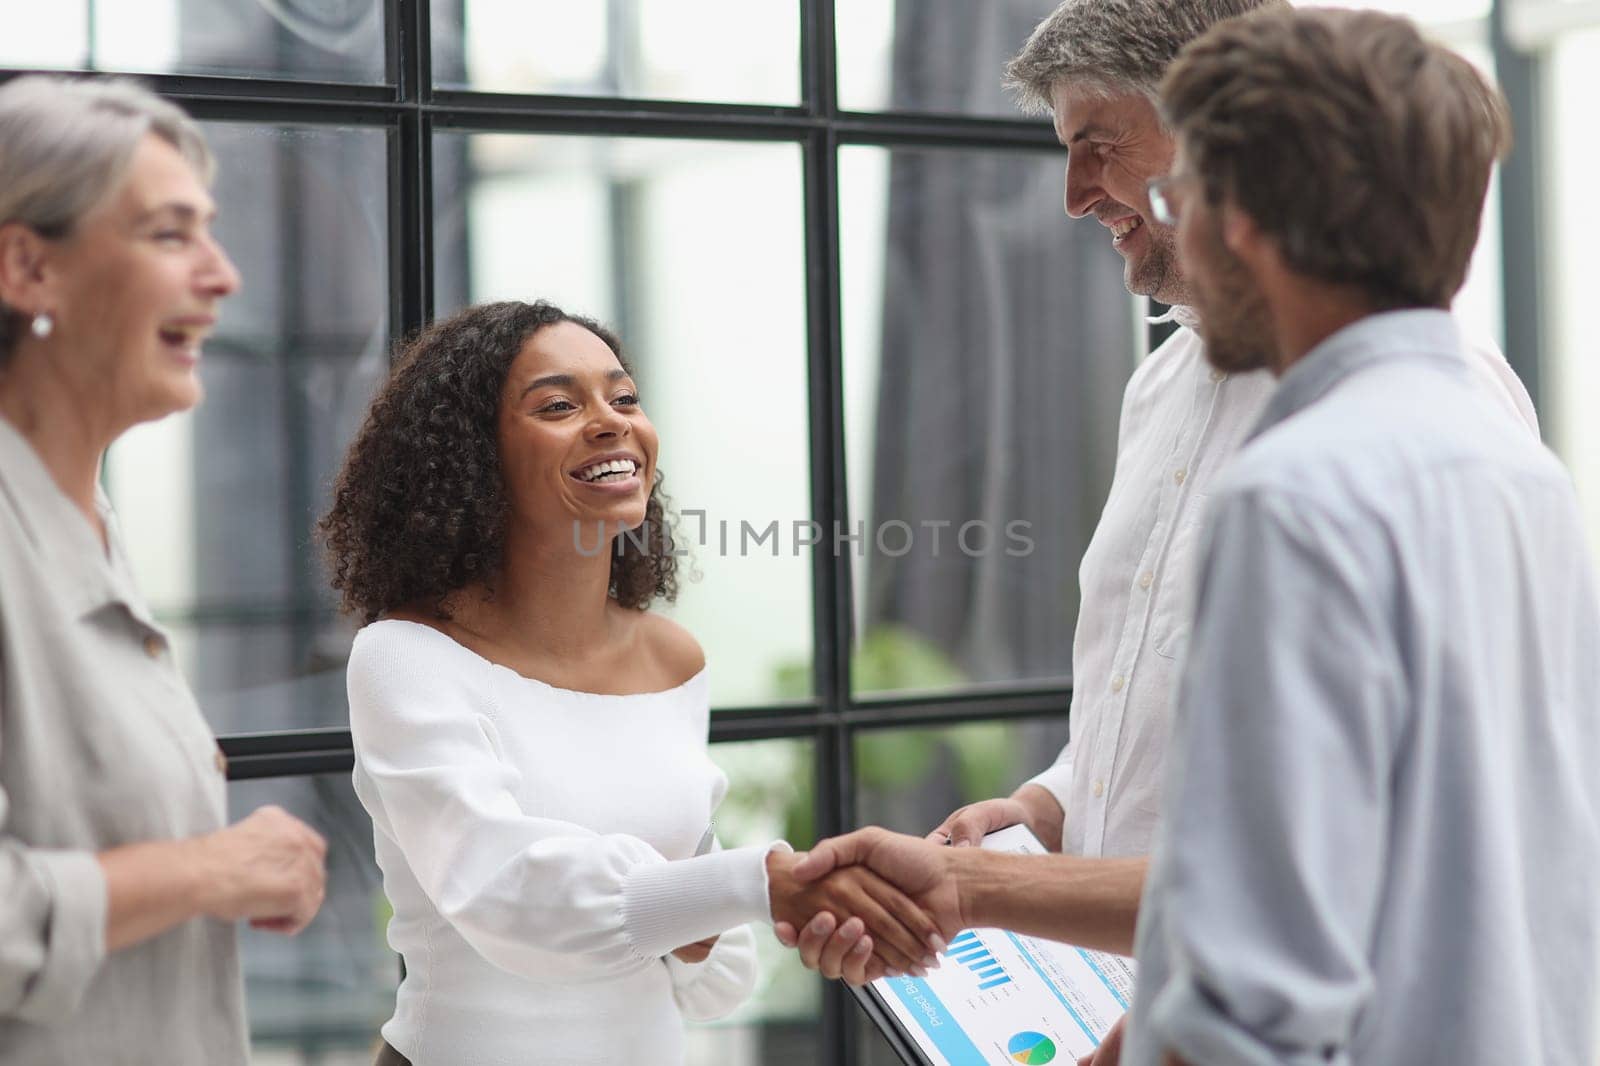 Smiling multiethnic businesspeople shaking hand in office.